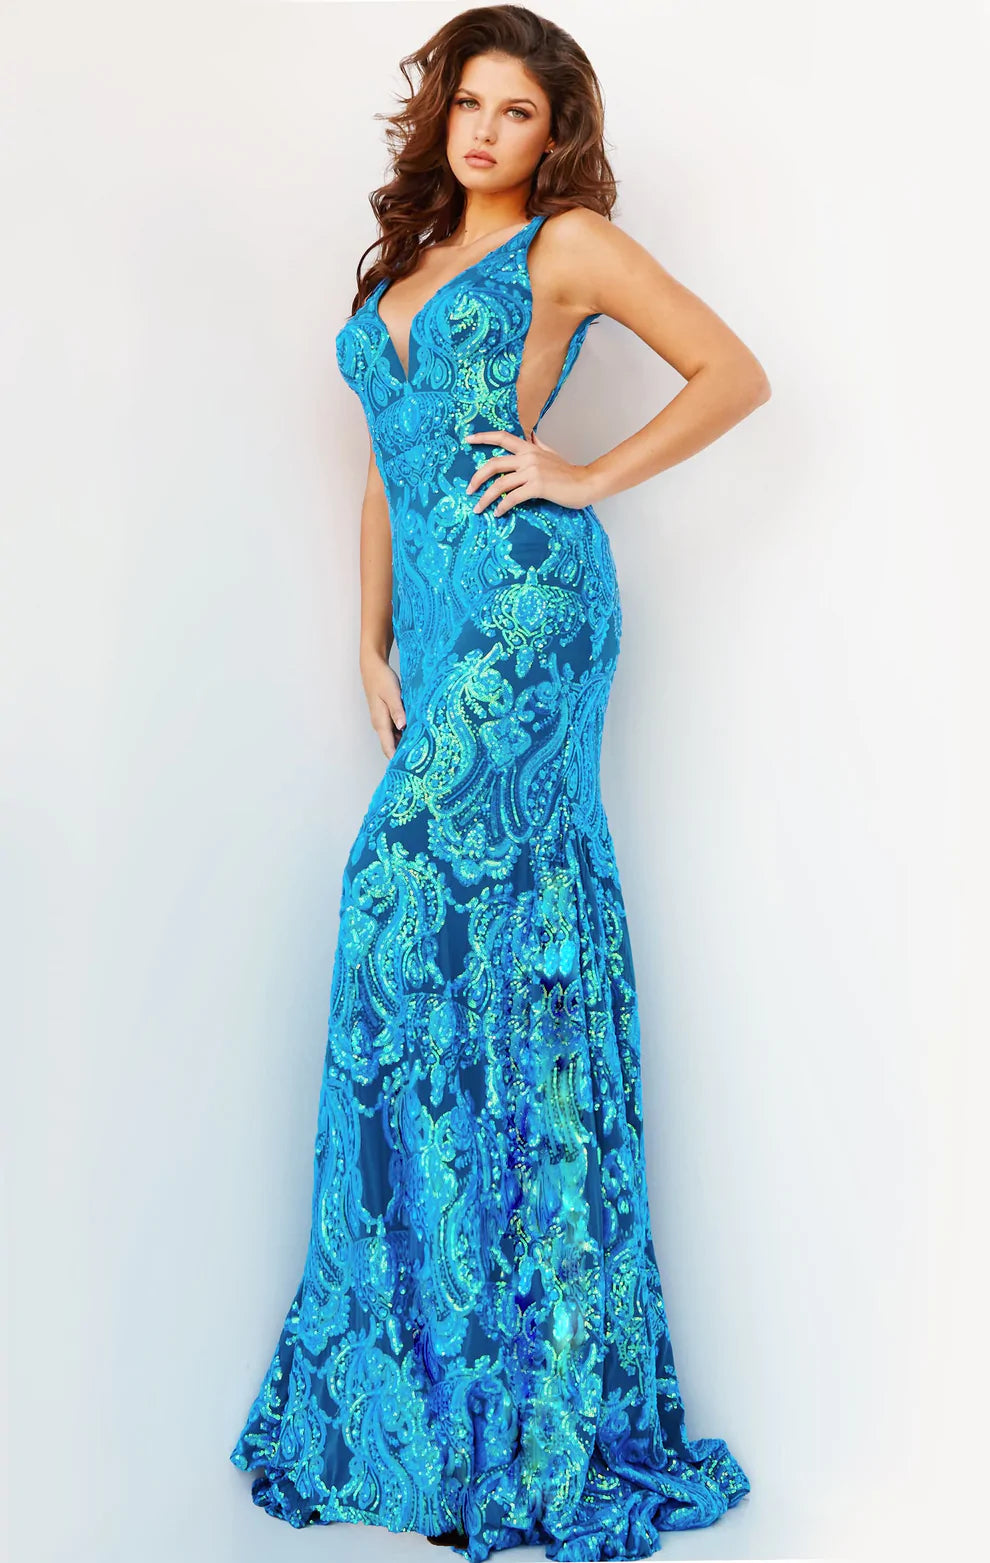 Jovani 08646 Long Iridescent Sequin Fitted Sequin Backless Mermaid Formal Prom Dress Pageant  V neckline with sheer mesh sides. open V Back.  Available Sizes: 00-24  Available Colors: Iridescent Royal, Hot Pink